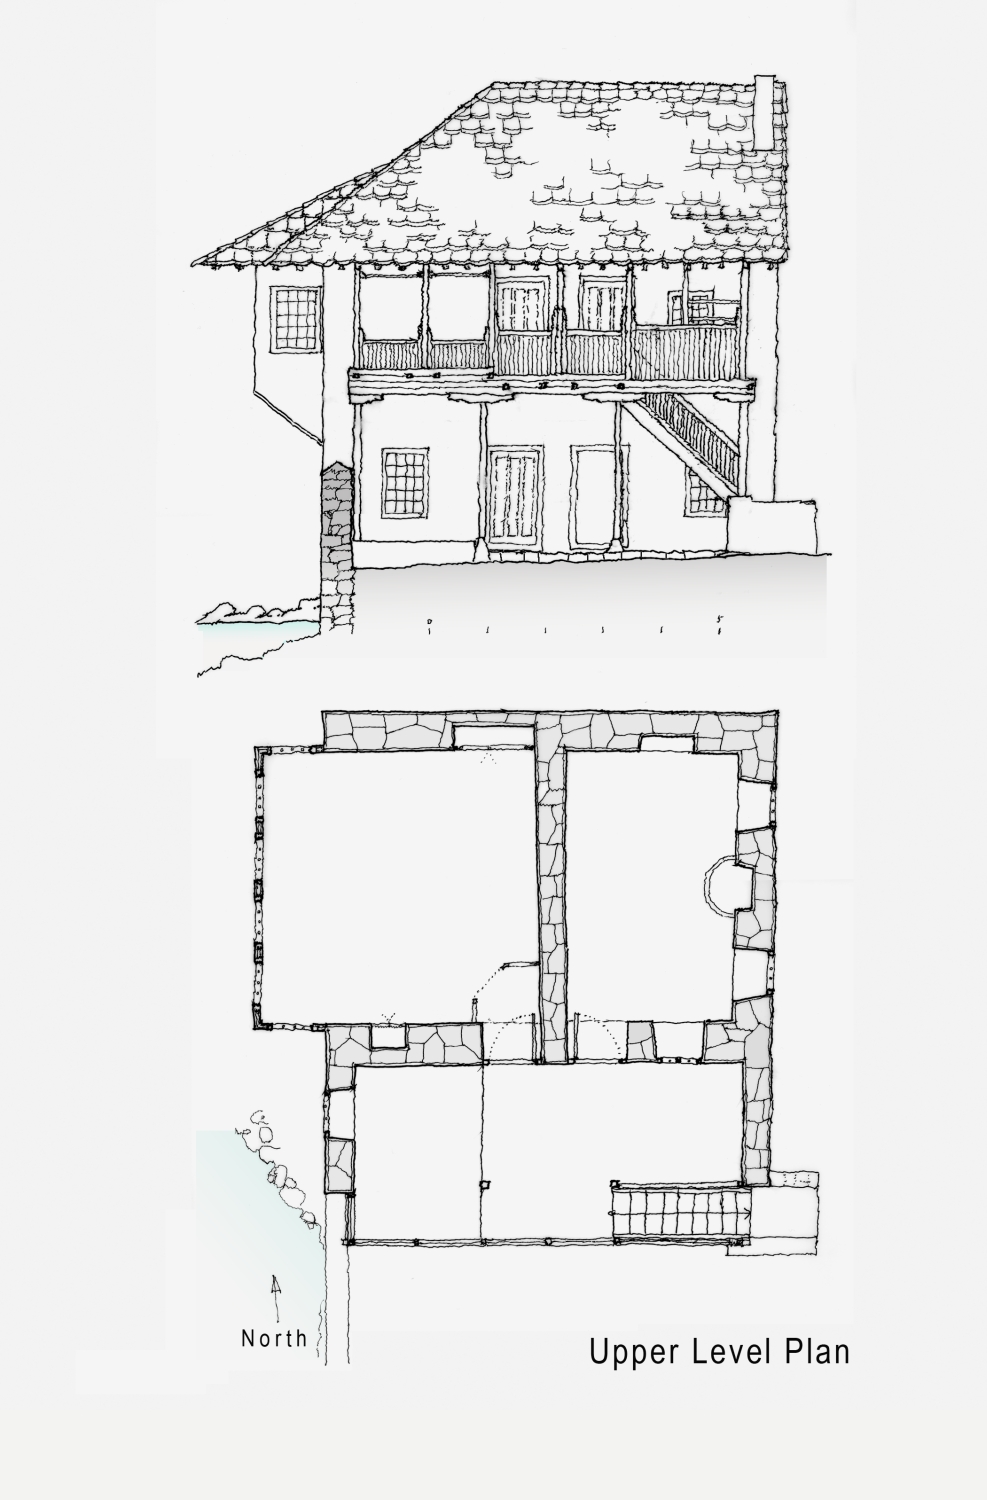 Plan and south elevation of konak, drawn in 2014 based on 1962 documents